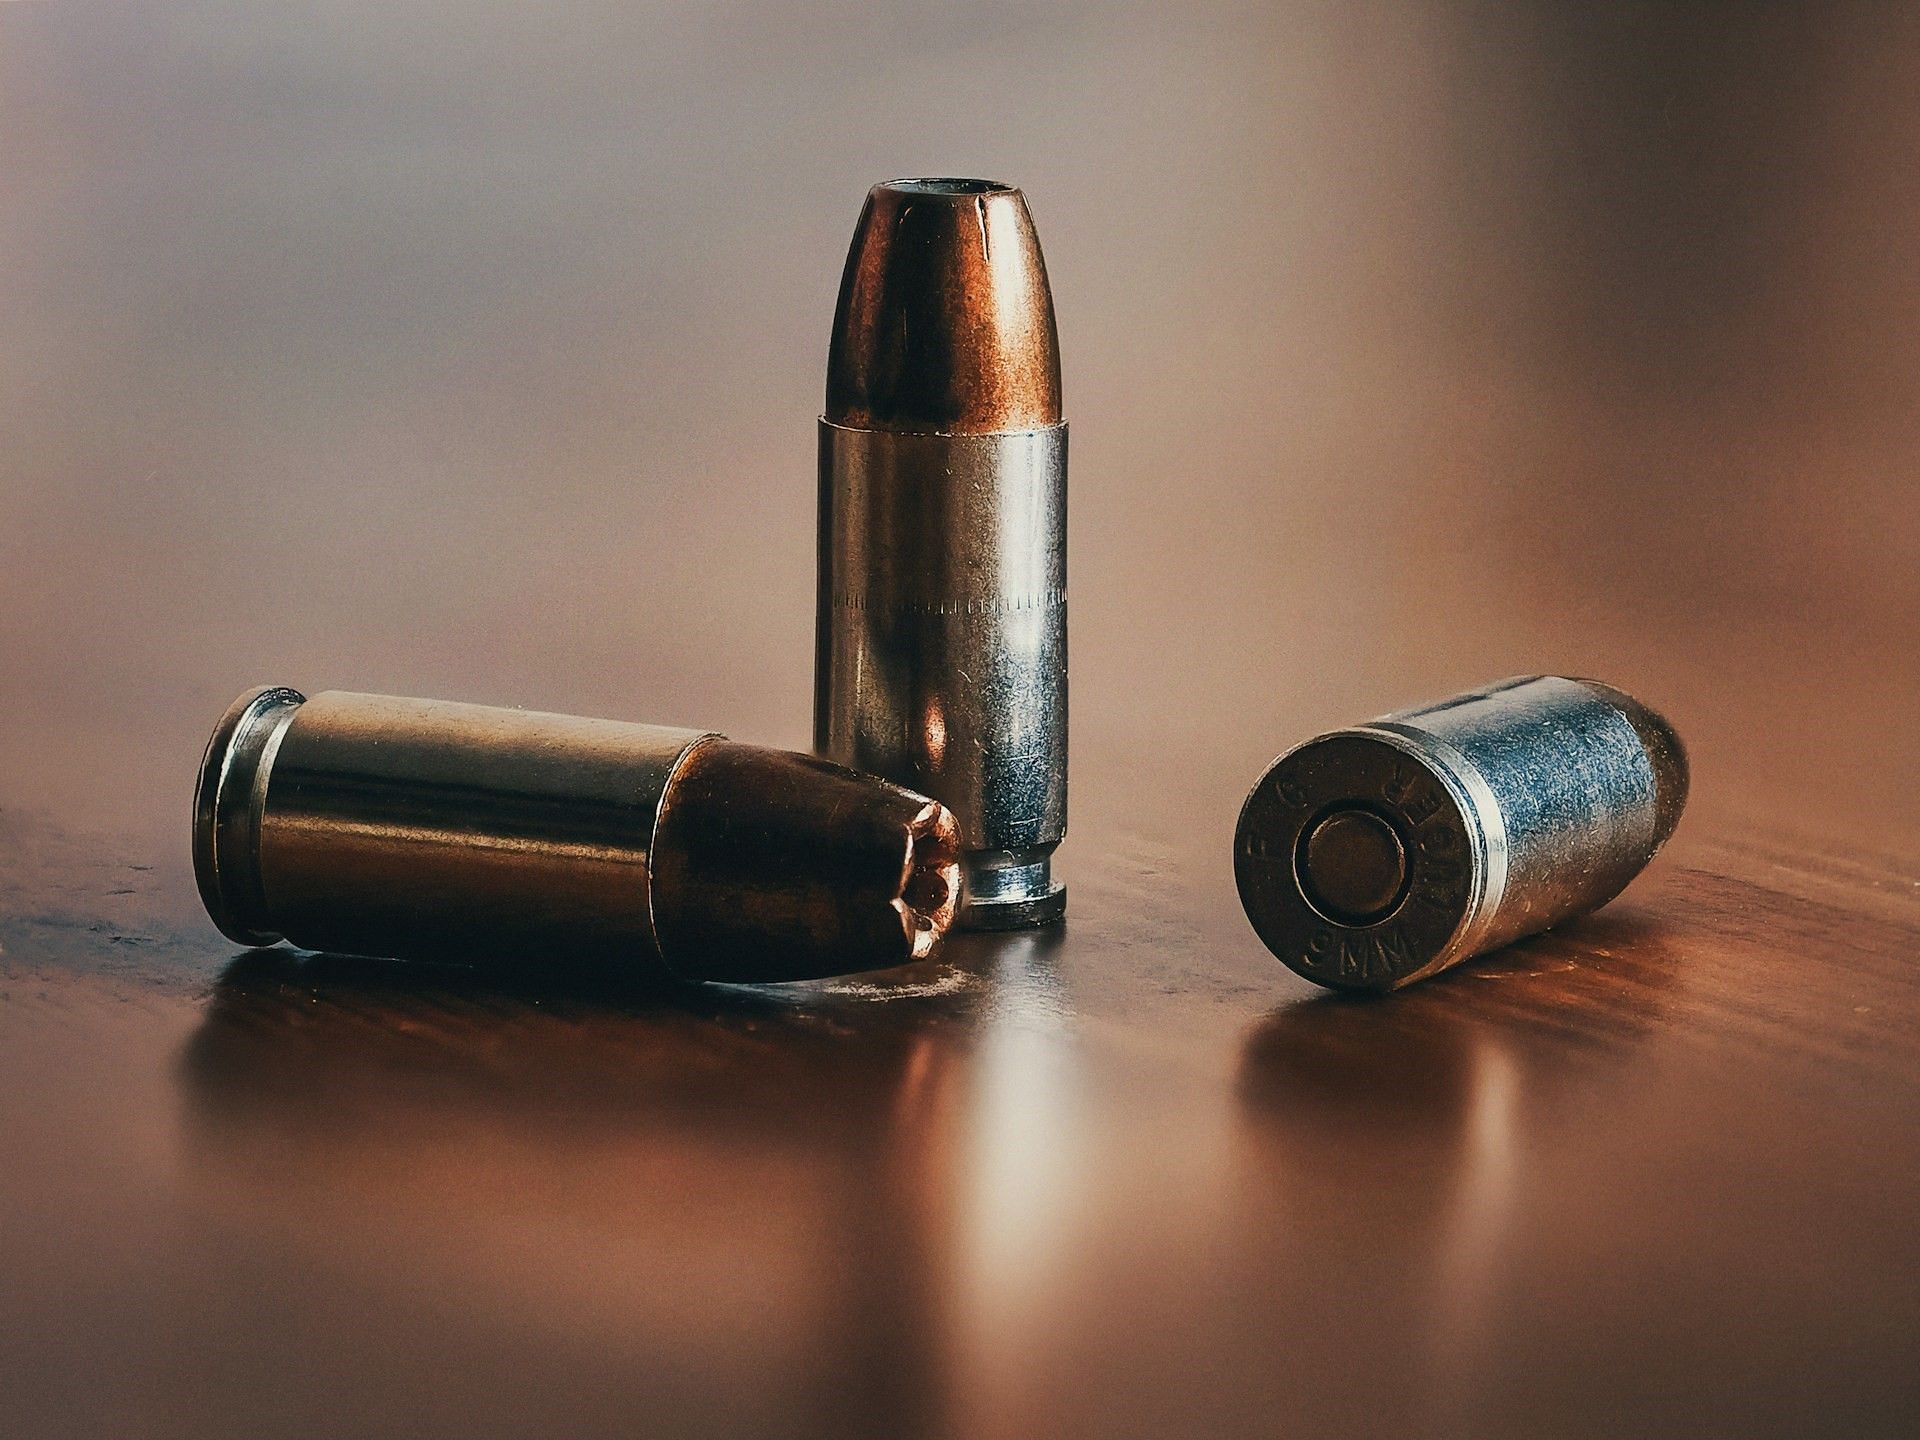 Watkins and Hardy got rid of the murder weapon and the shell casings (Image via Unsplash)